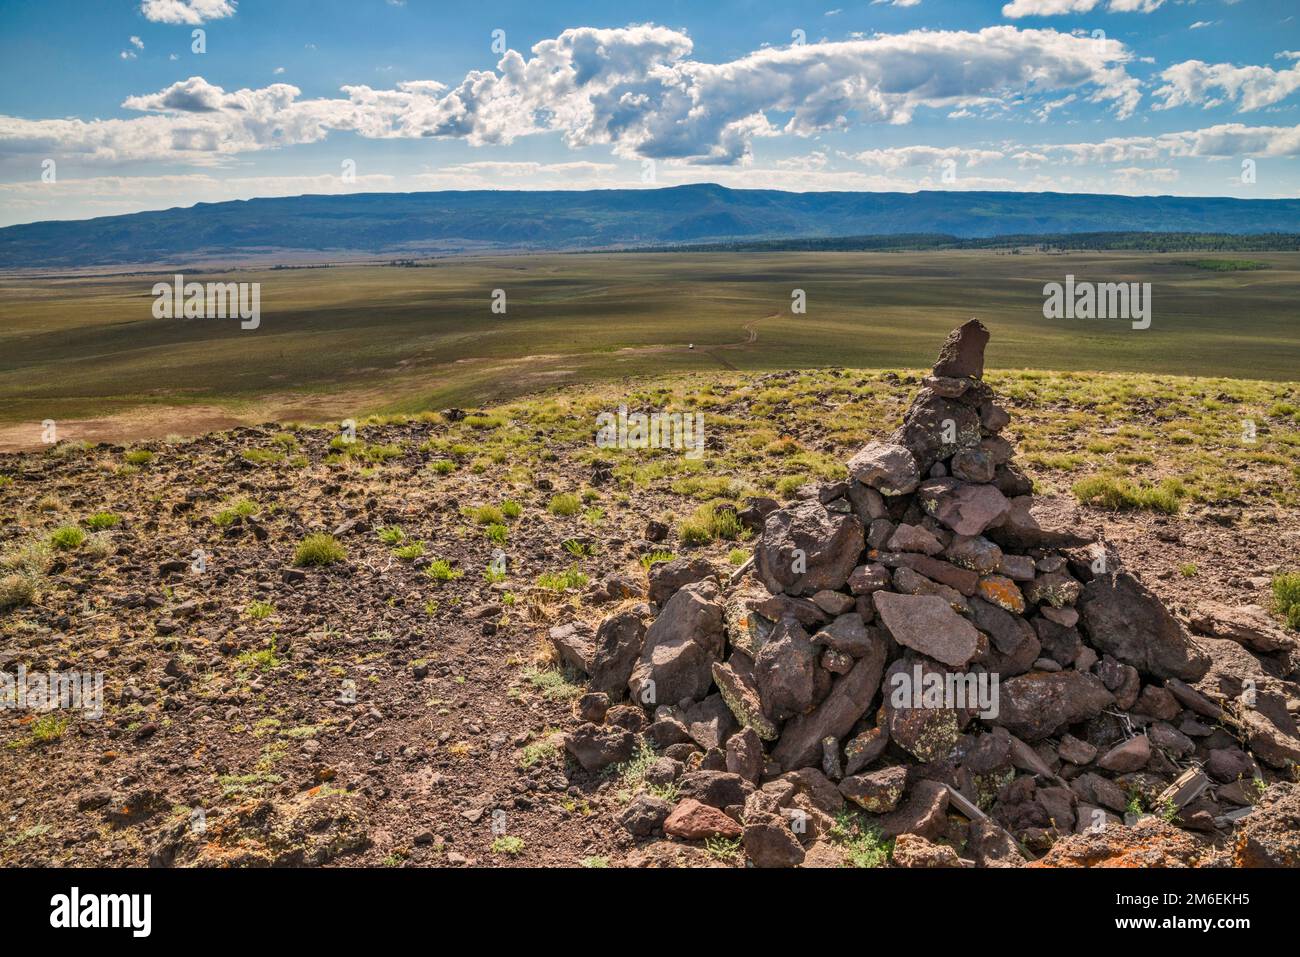 Rock Cairn a Smooth Knoll, Boulder Mountain in Distance, Awapa Plateau, Posey Lake Road (FR 154), vicino a Bicknell, Utah, USA Foto Stock